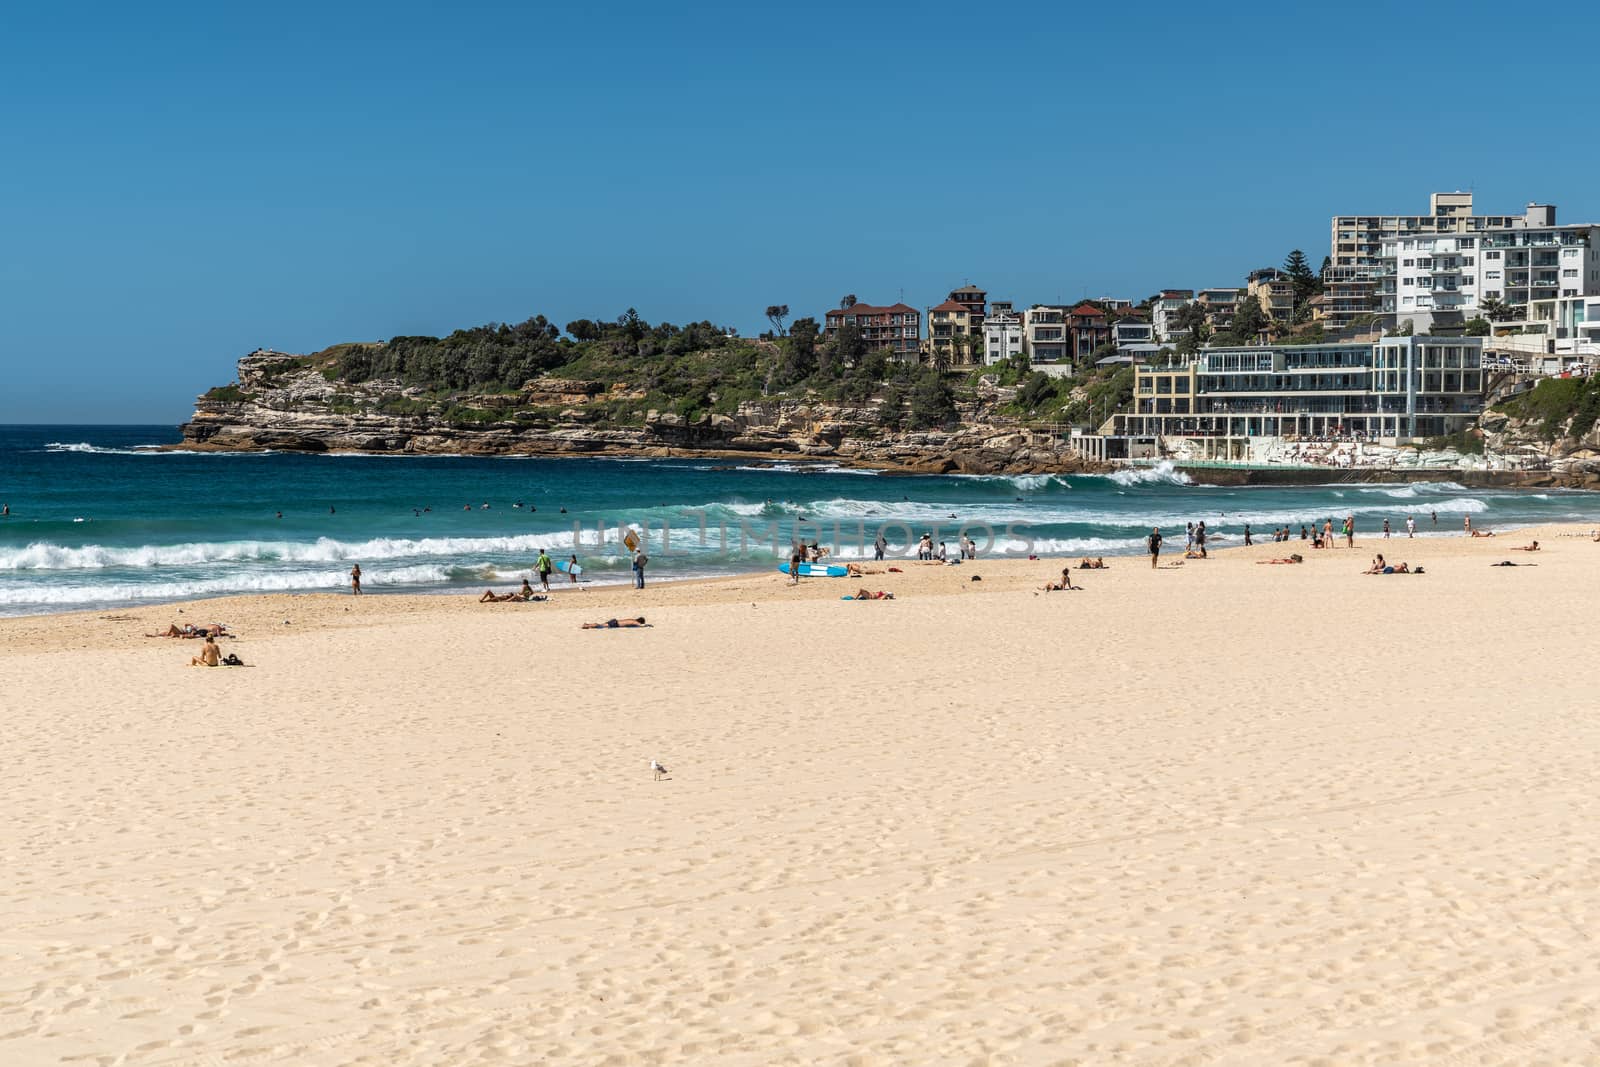 Sydney, Australia - February 11, 2019: Bondi Beach and south side cliffs with housing and Bondi Icebergs Club house and pool.  under blue sky. Pale yellow sand with people in front, blue water.